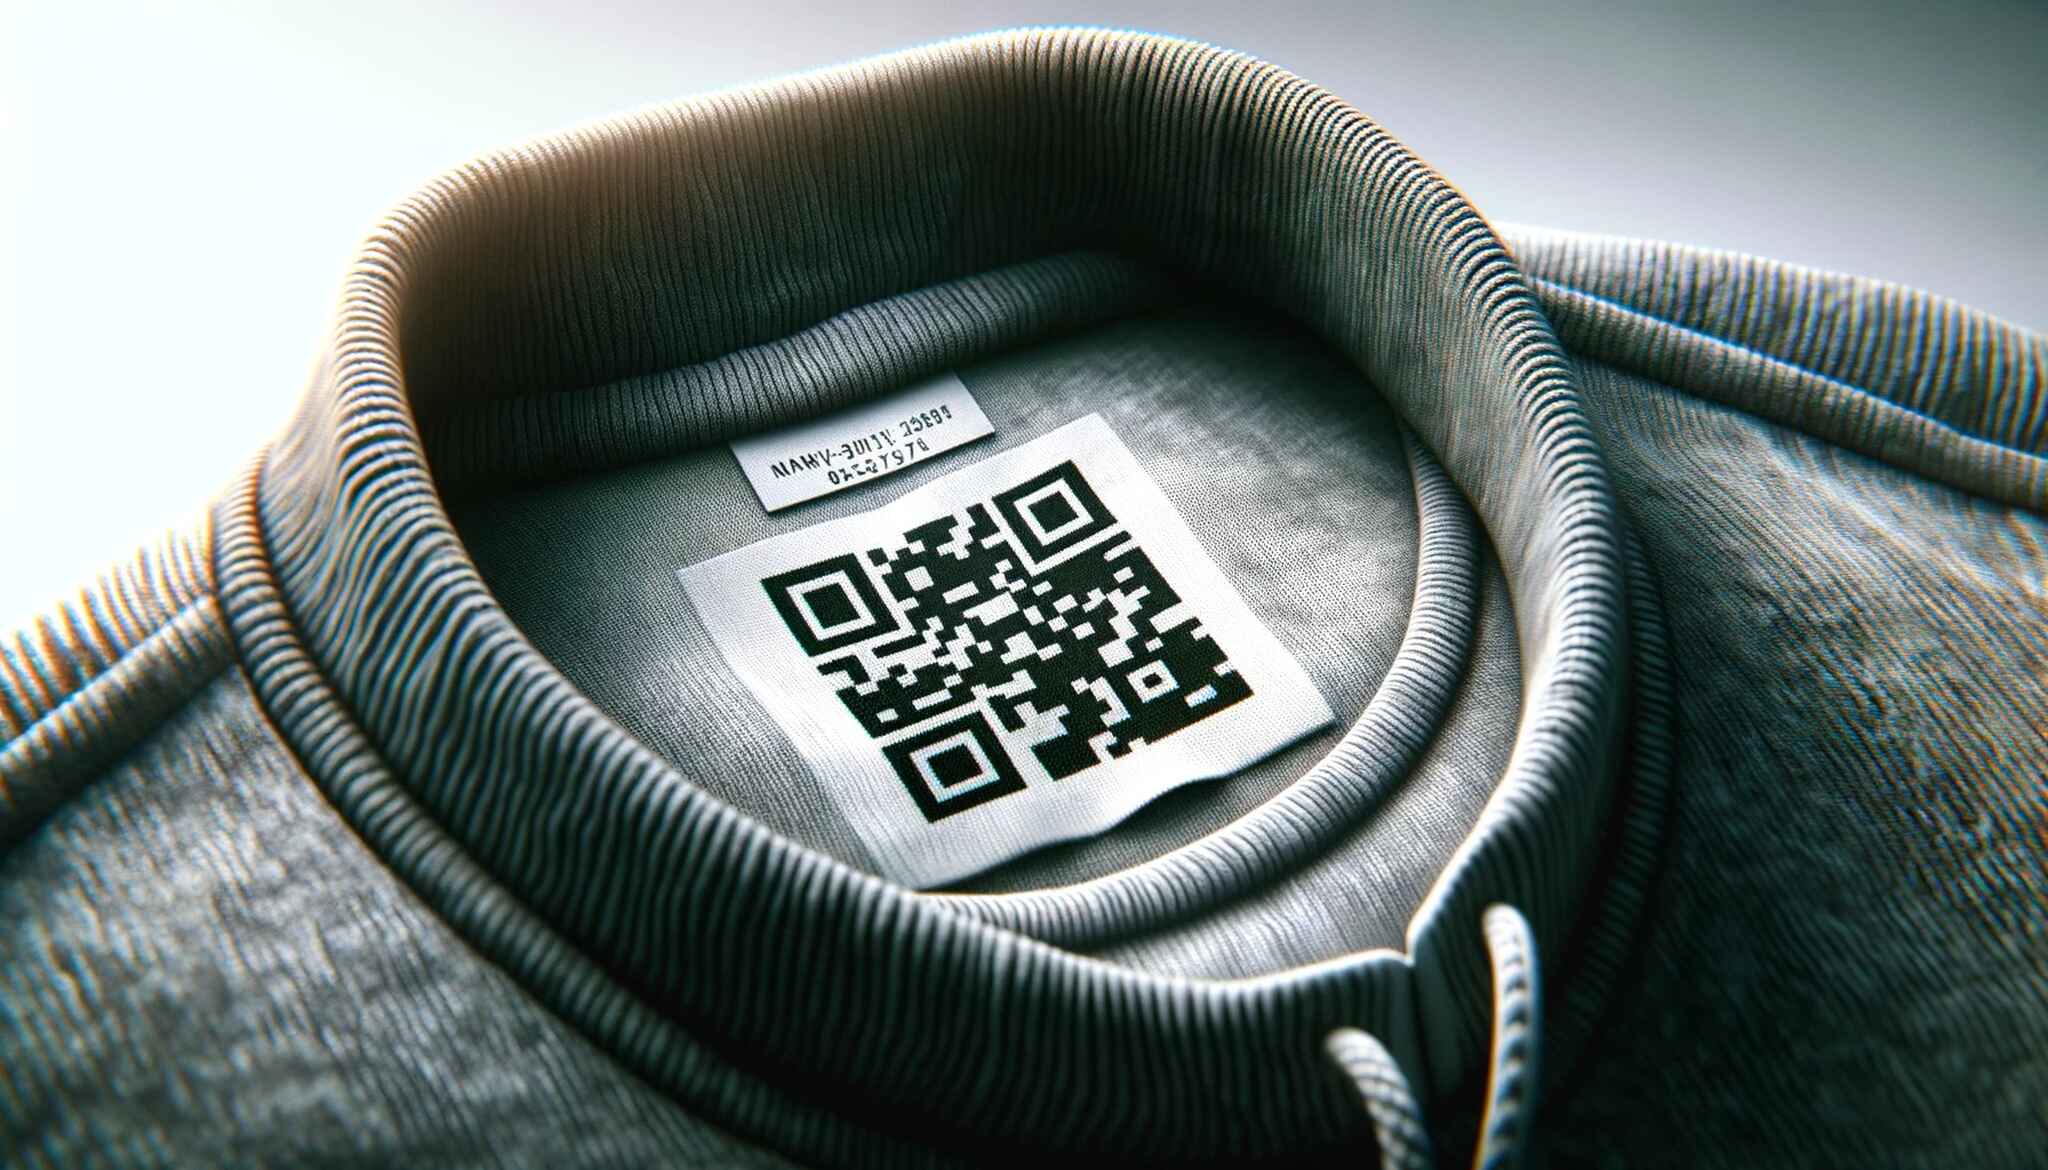 A close-up of a clothing item showcasing a small QR code